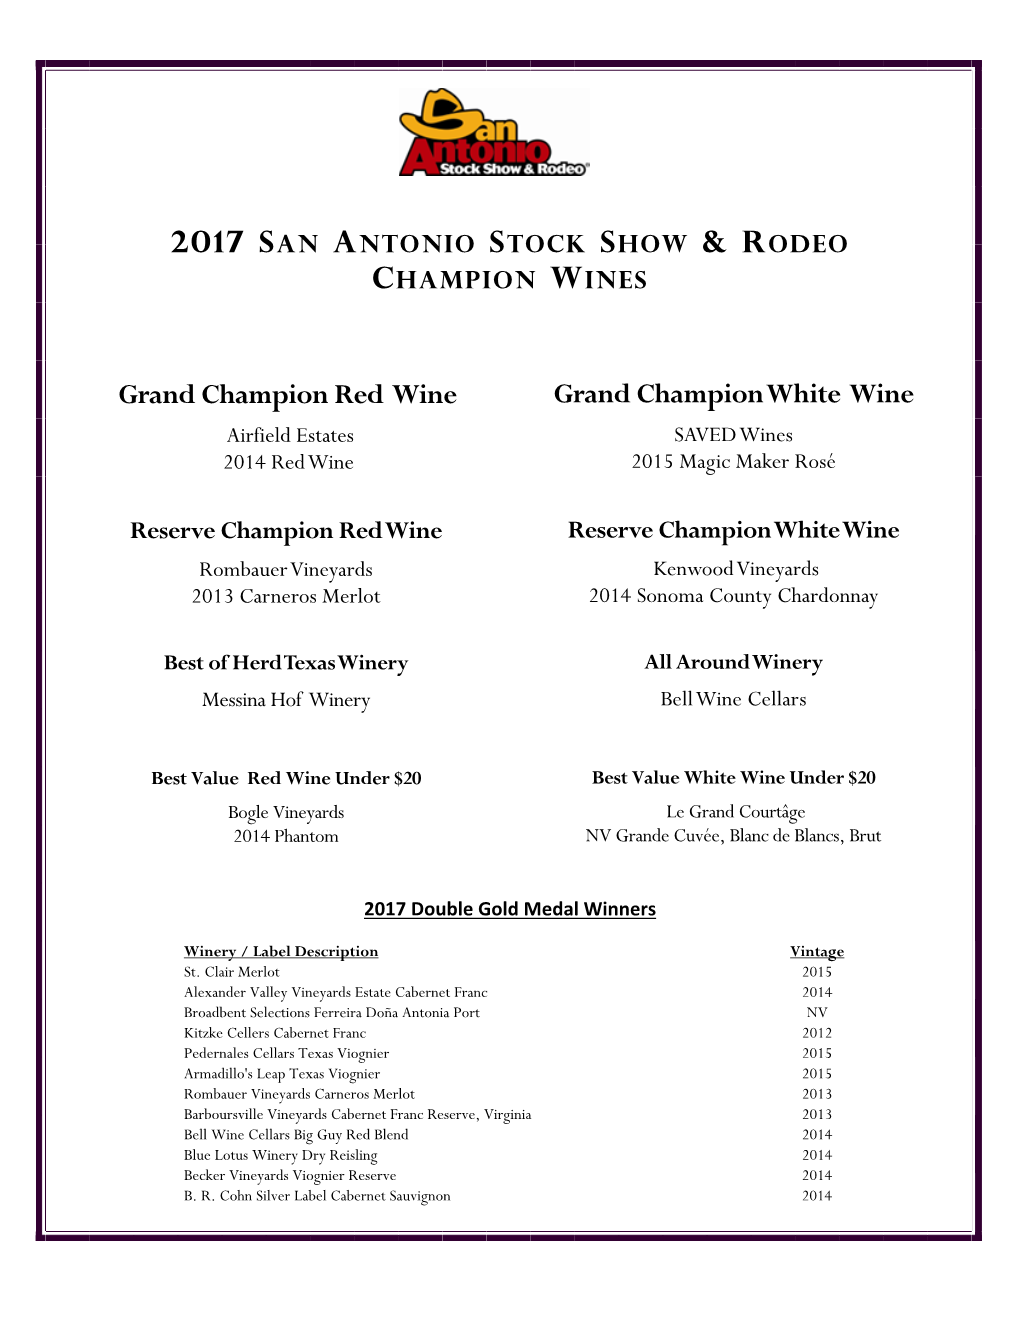 2017 International Wine Competition Medal Winners